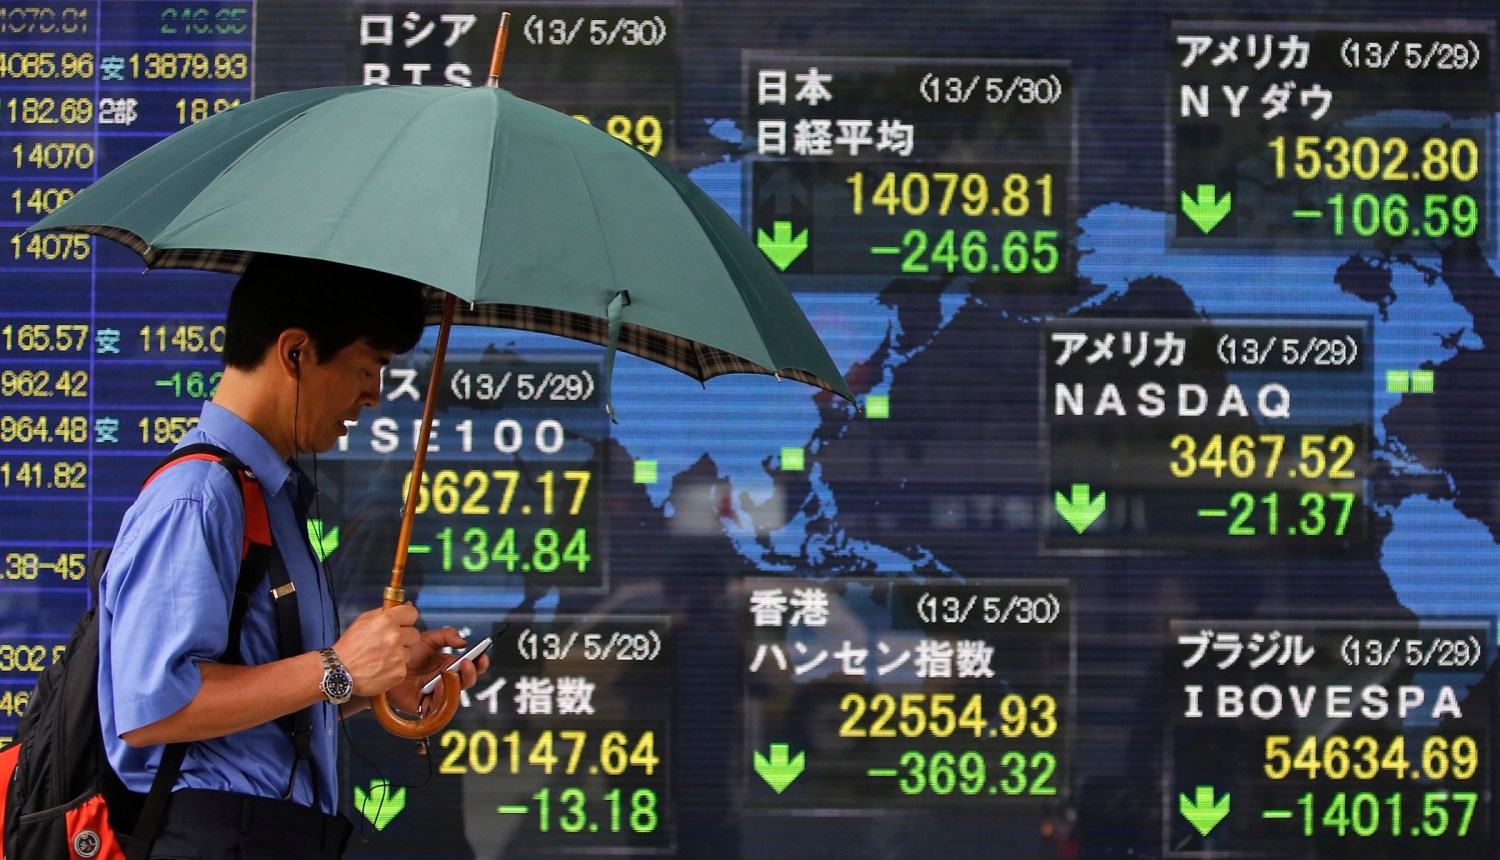 A pedestrian holding an umbrella walks past a stock quotation board showing various countries' stock prices outside a brokerage in Tokyo May 30, 2013. The Nikkei share average fell below 14,000 on Thursday with a drop in U.S. stocks and a stronger yen hurting sentiment, while caution over the recent volatility in the Japanese market is keeping investors risk-averse. REUTERS/Yuya Shino (JAPAN - Tags: BUSINESS) - GM1E95U0R0101